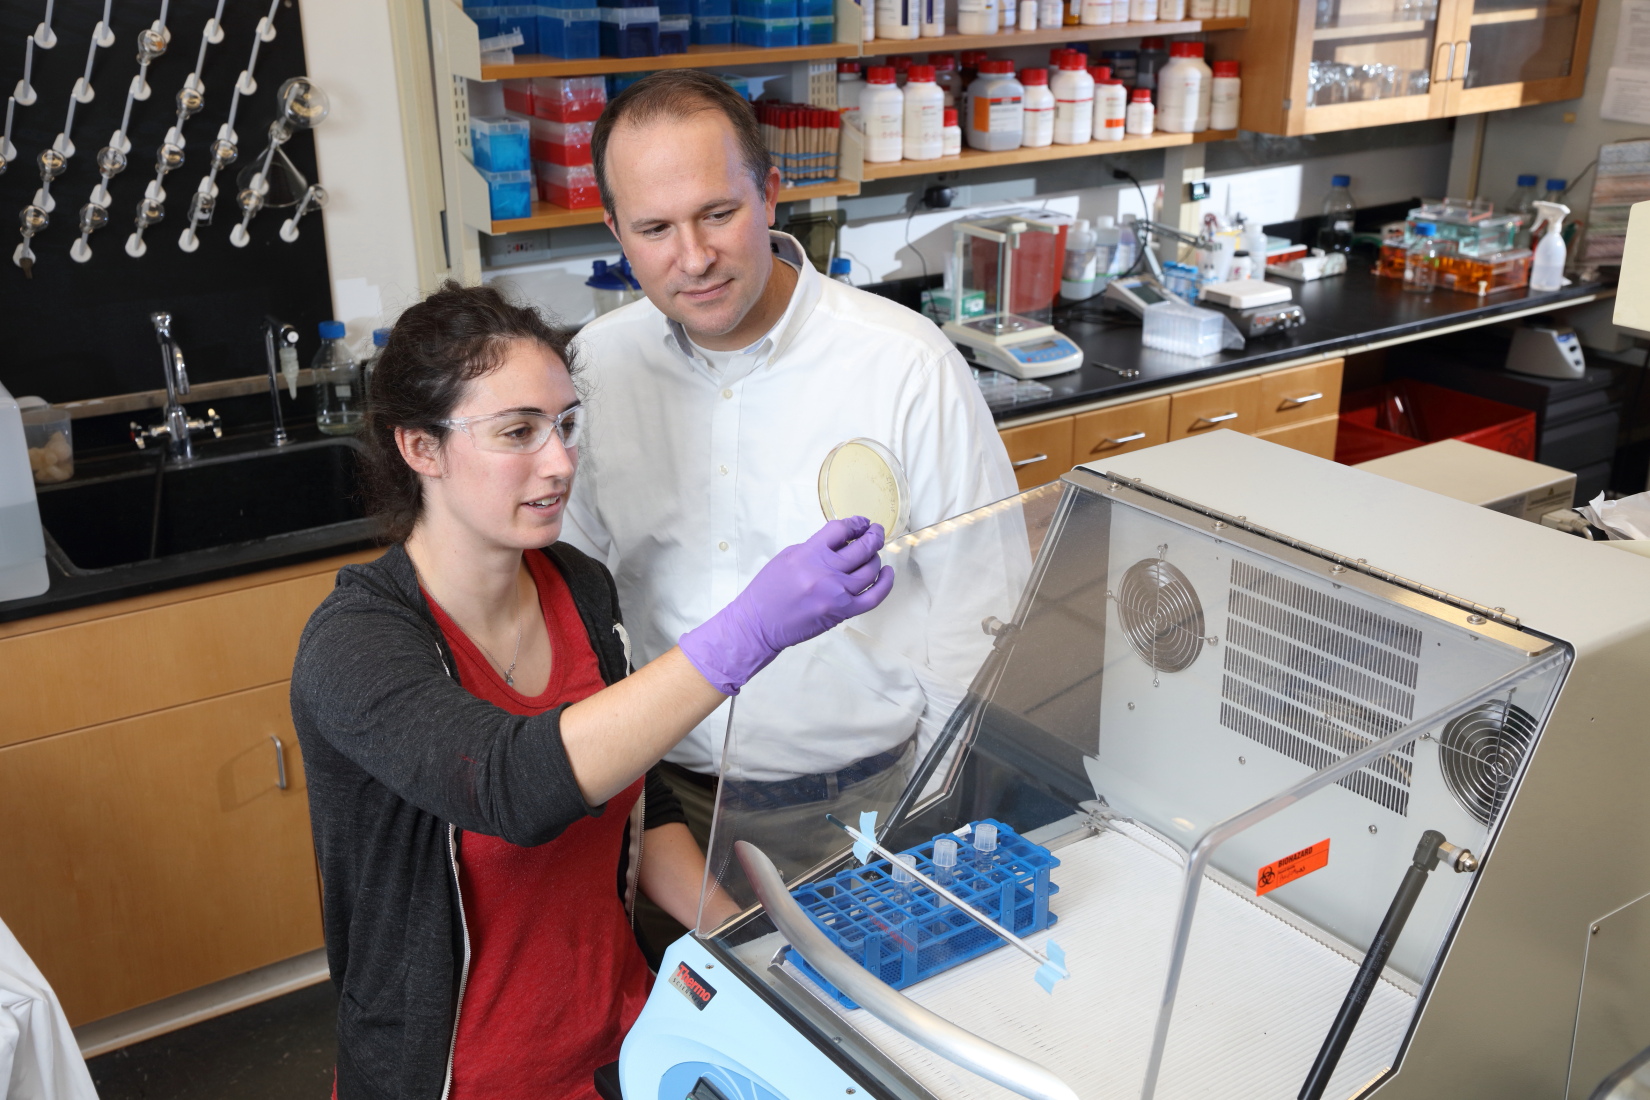 Jason Papin, a professor of biomedical engineering and principal investigator for the grant, works with Laura Dunphy, a first-year PhD student in biomedical engineering training in the Papin lab. 